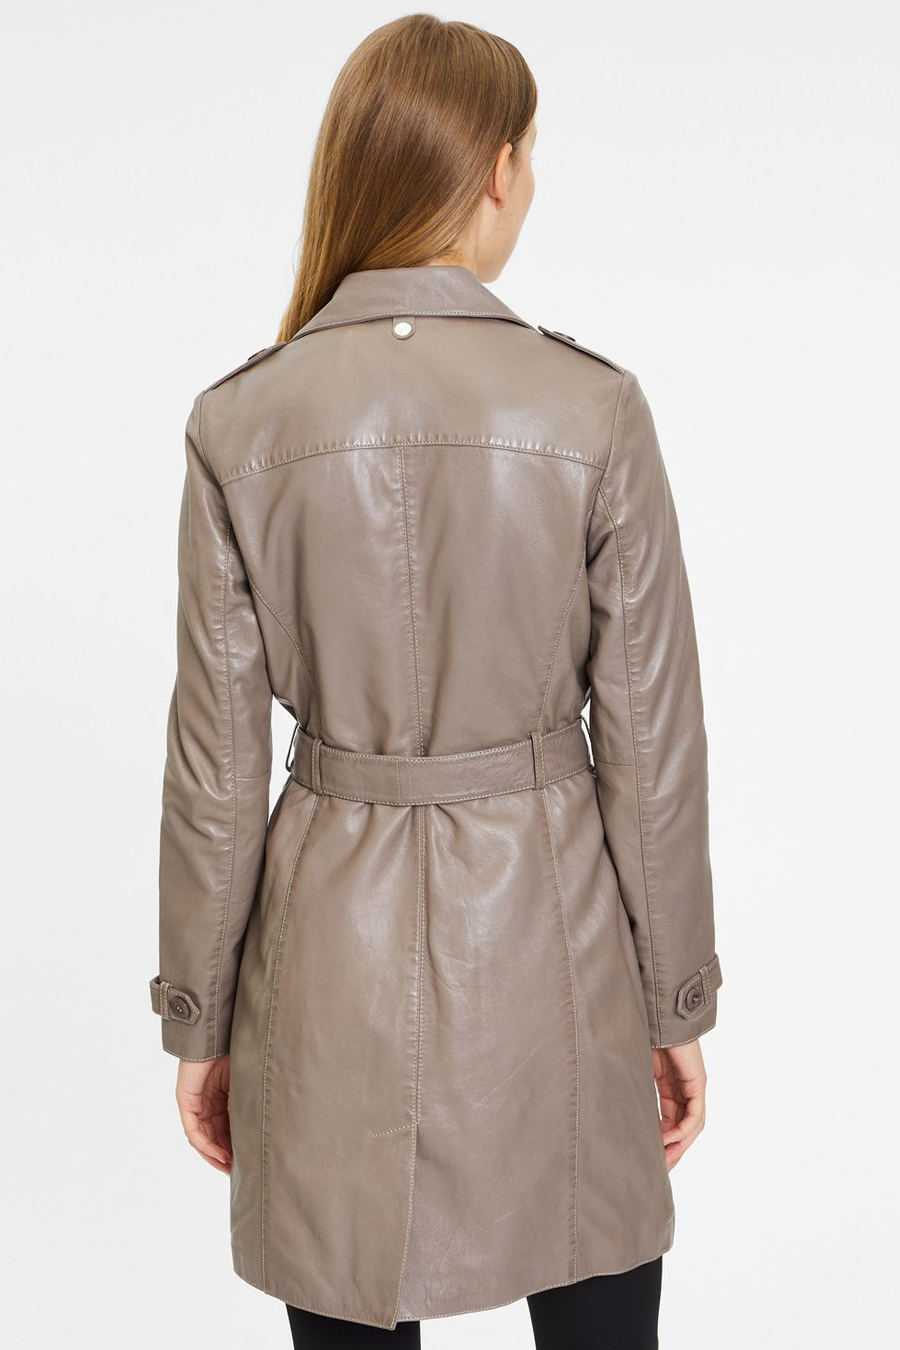 Leather jacket GIPSY 1102-0001-taupe